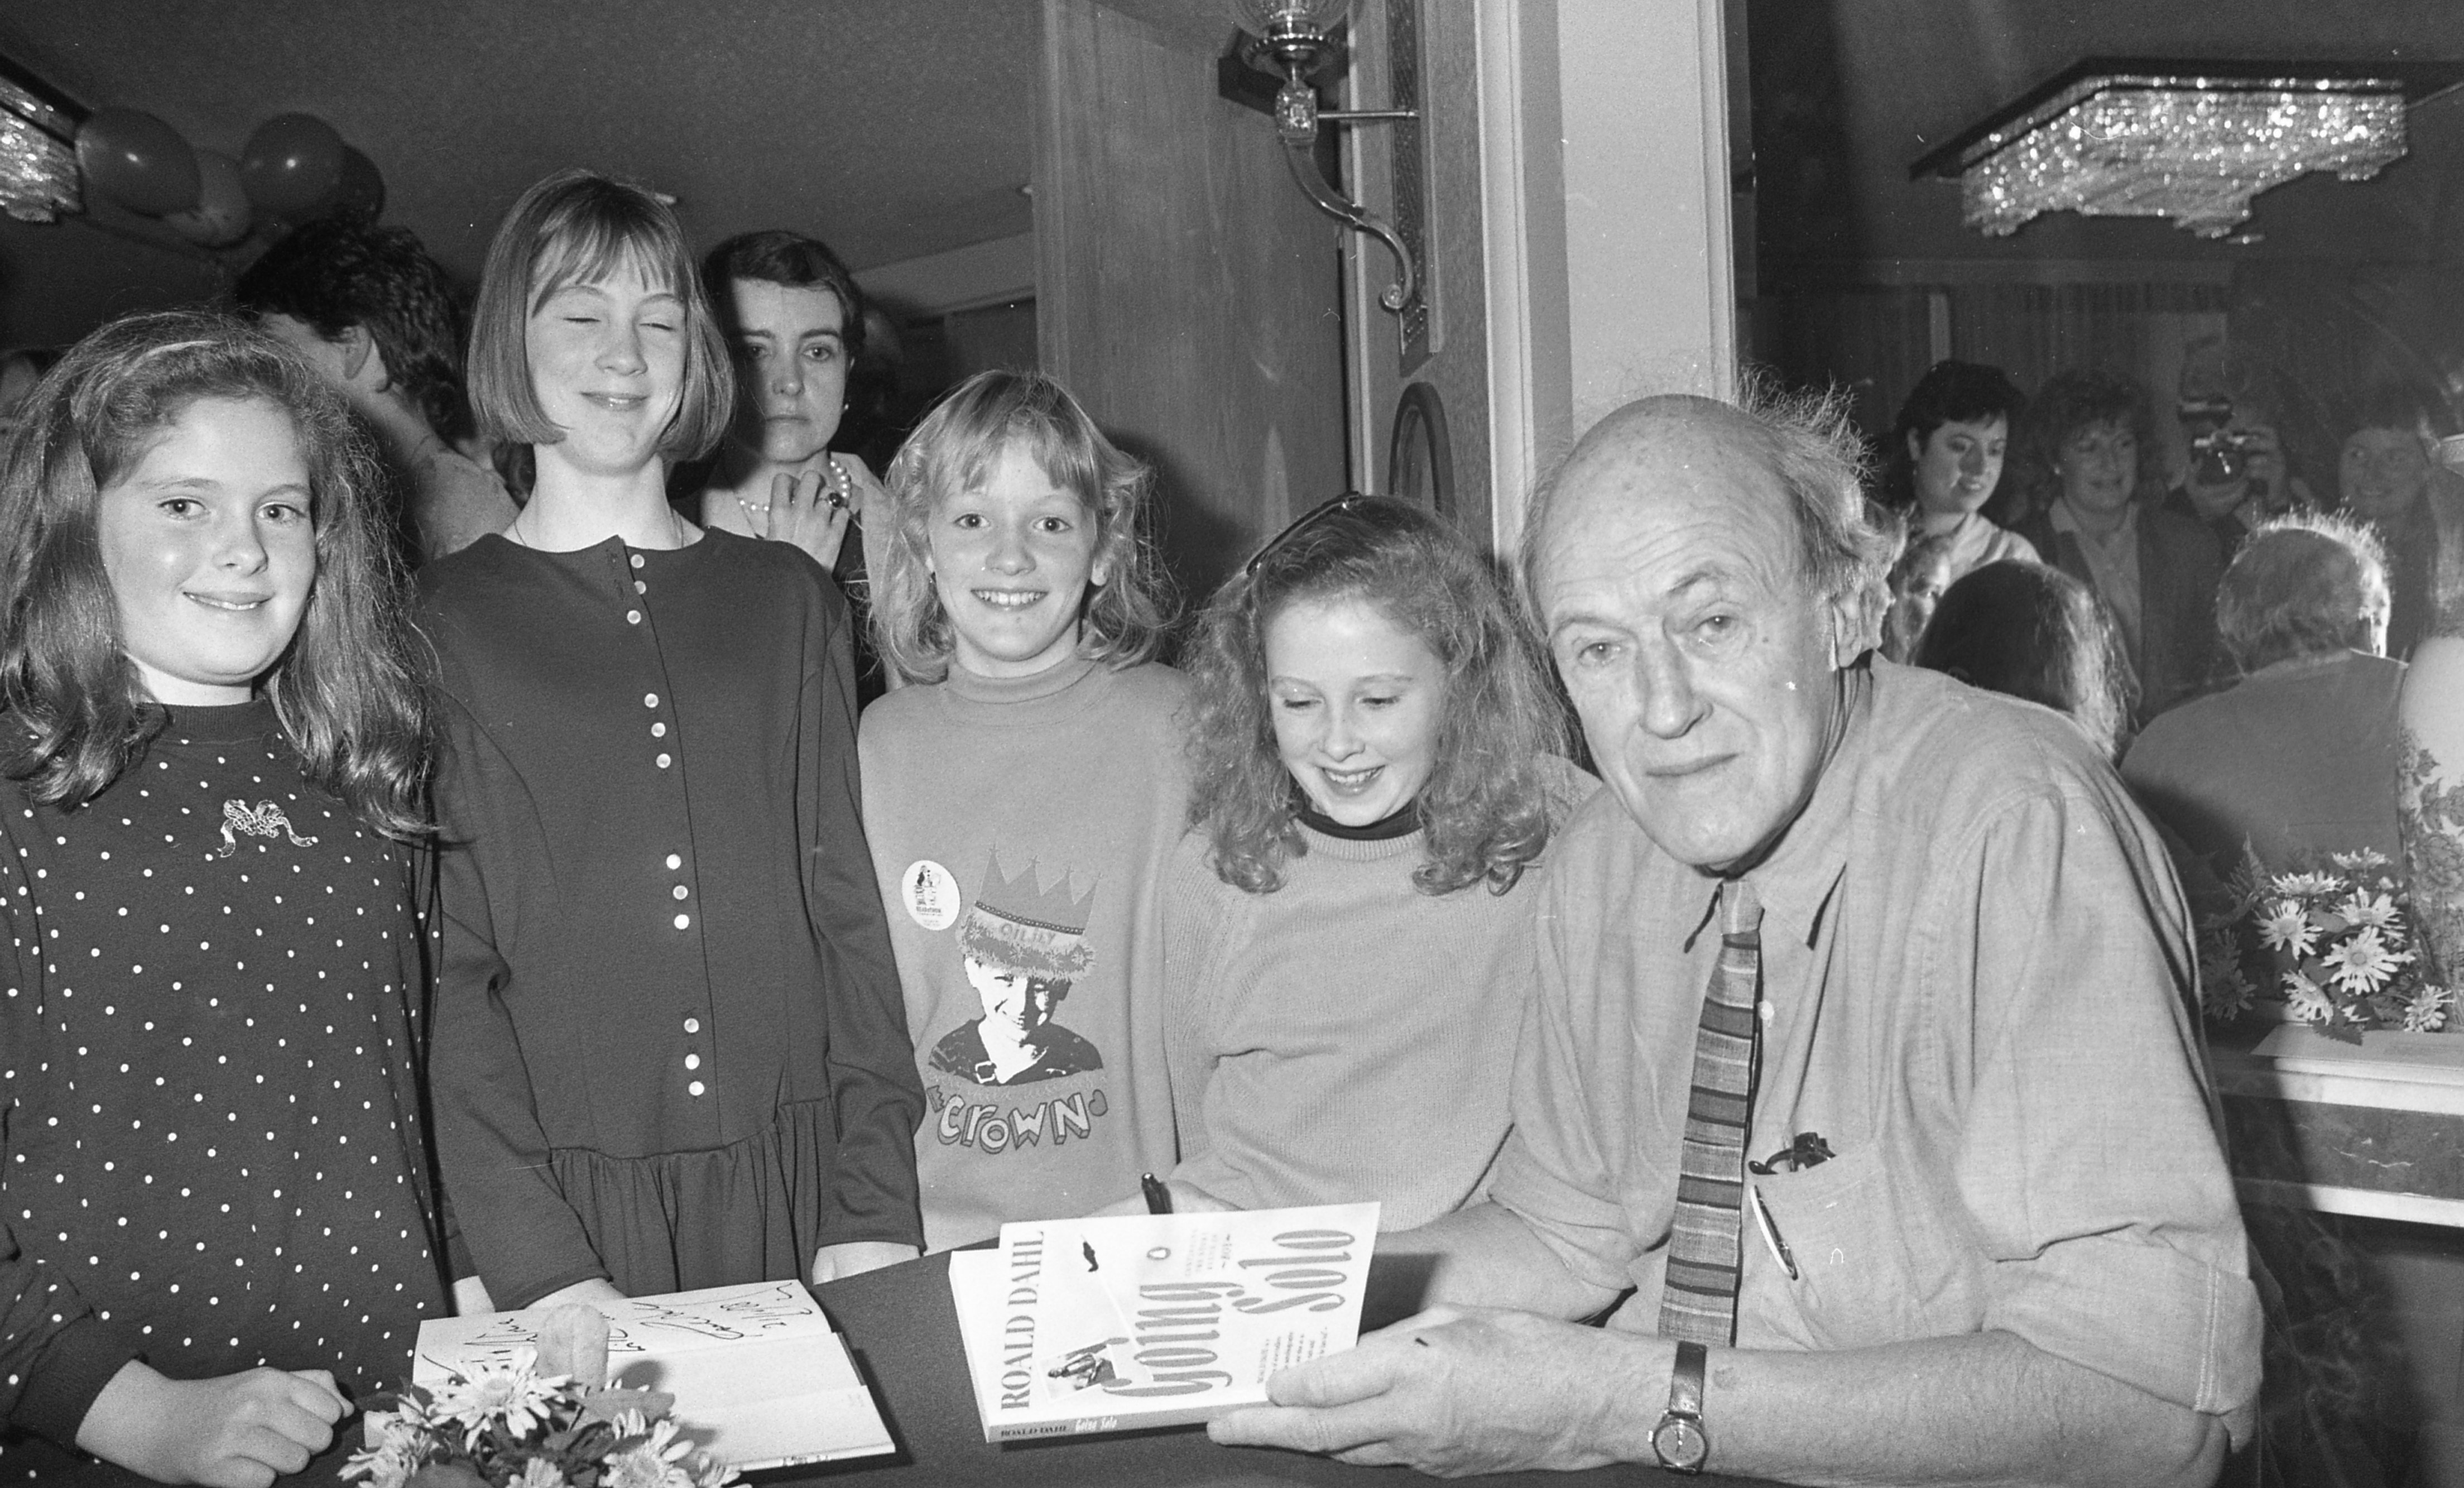 Roald Dahl signs autographs for young fans at the Westbury Hotel in 1988 